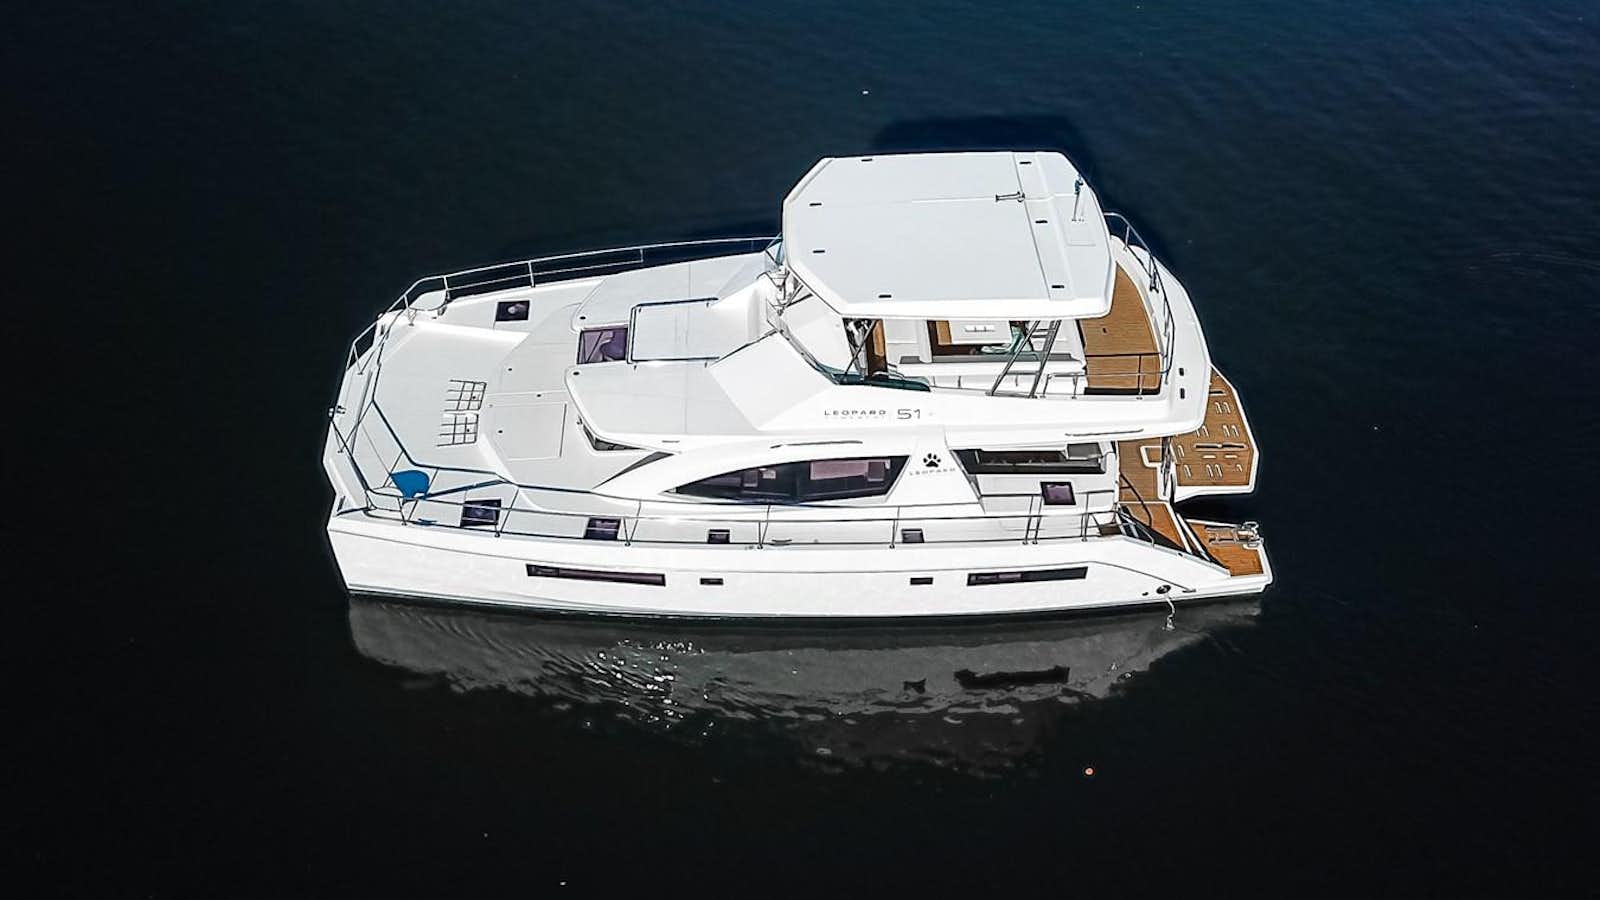 Nomad
Yacht for Sale